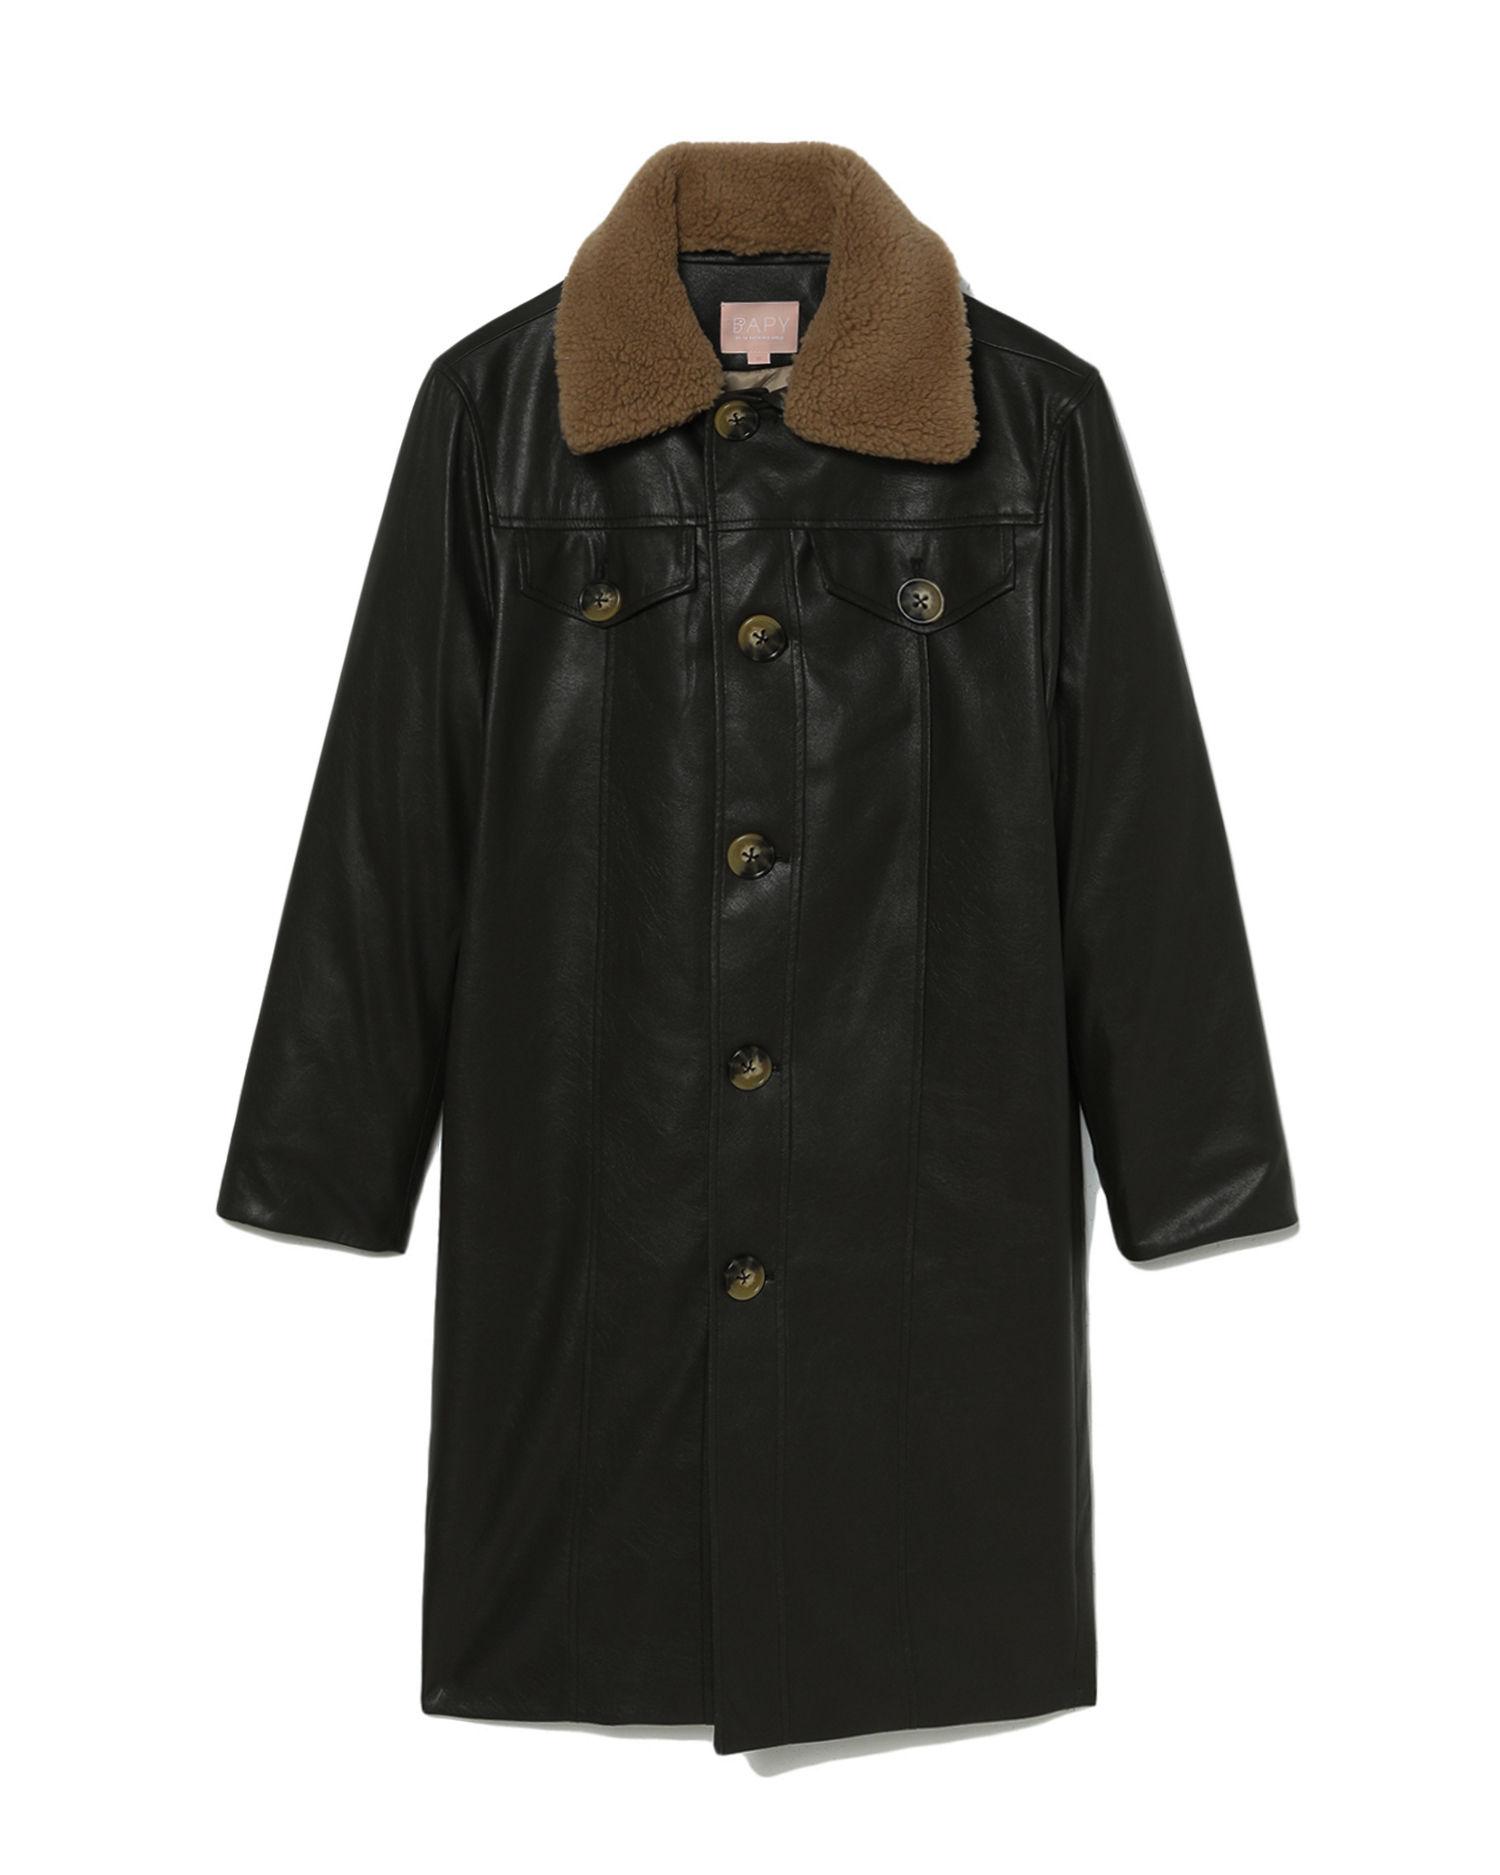 Oversized leather coat by BAPY